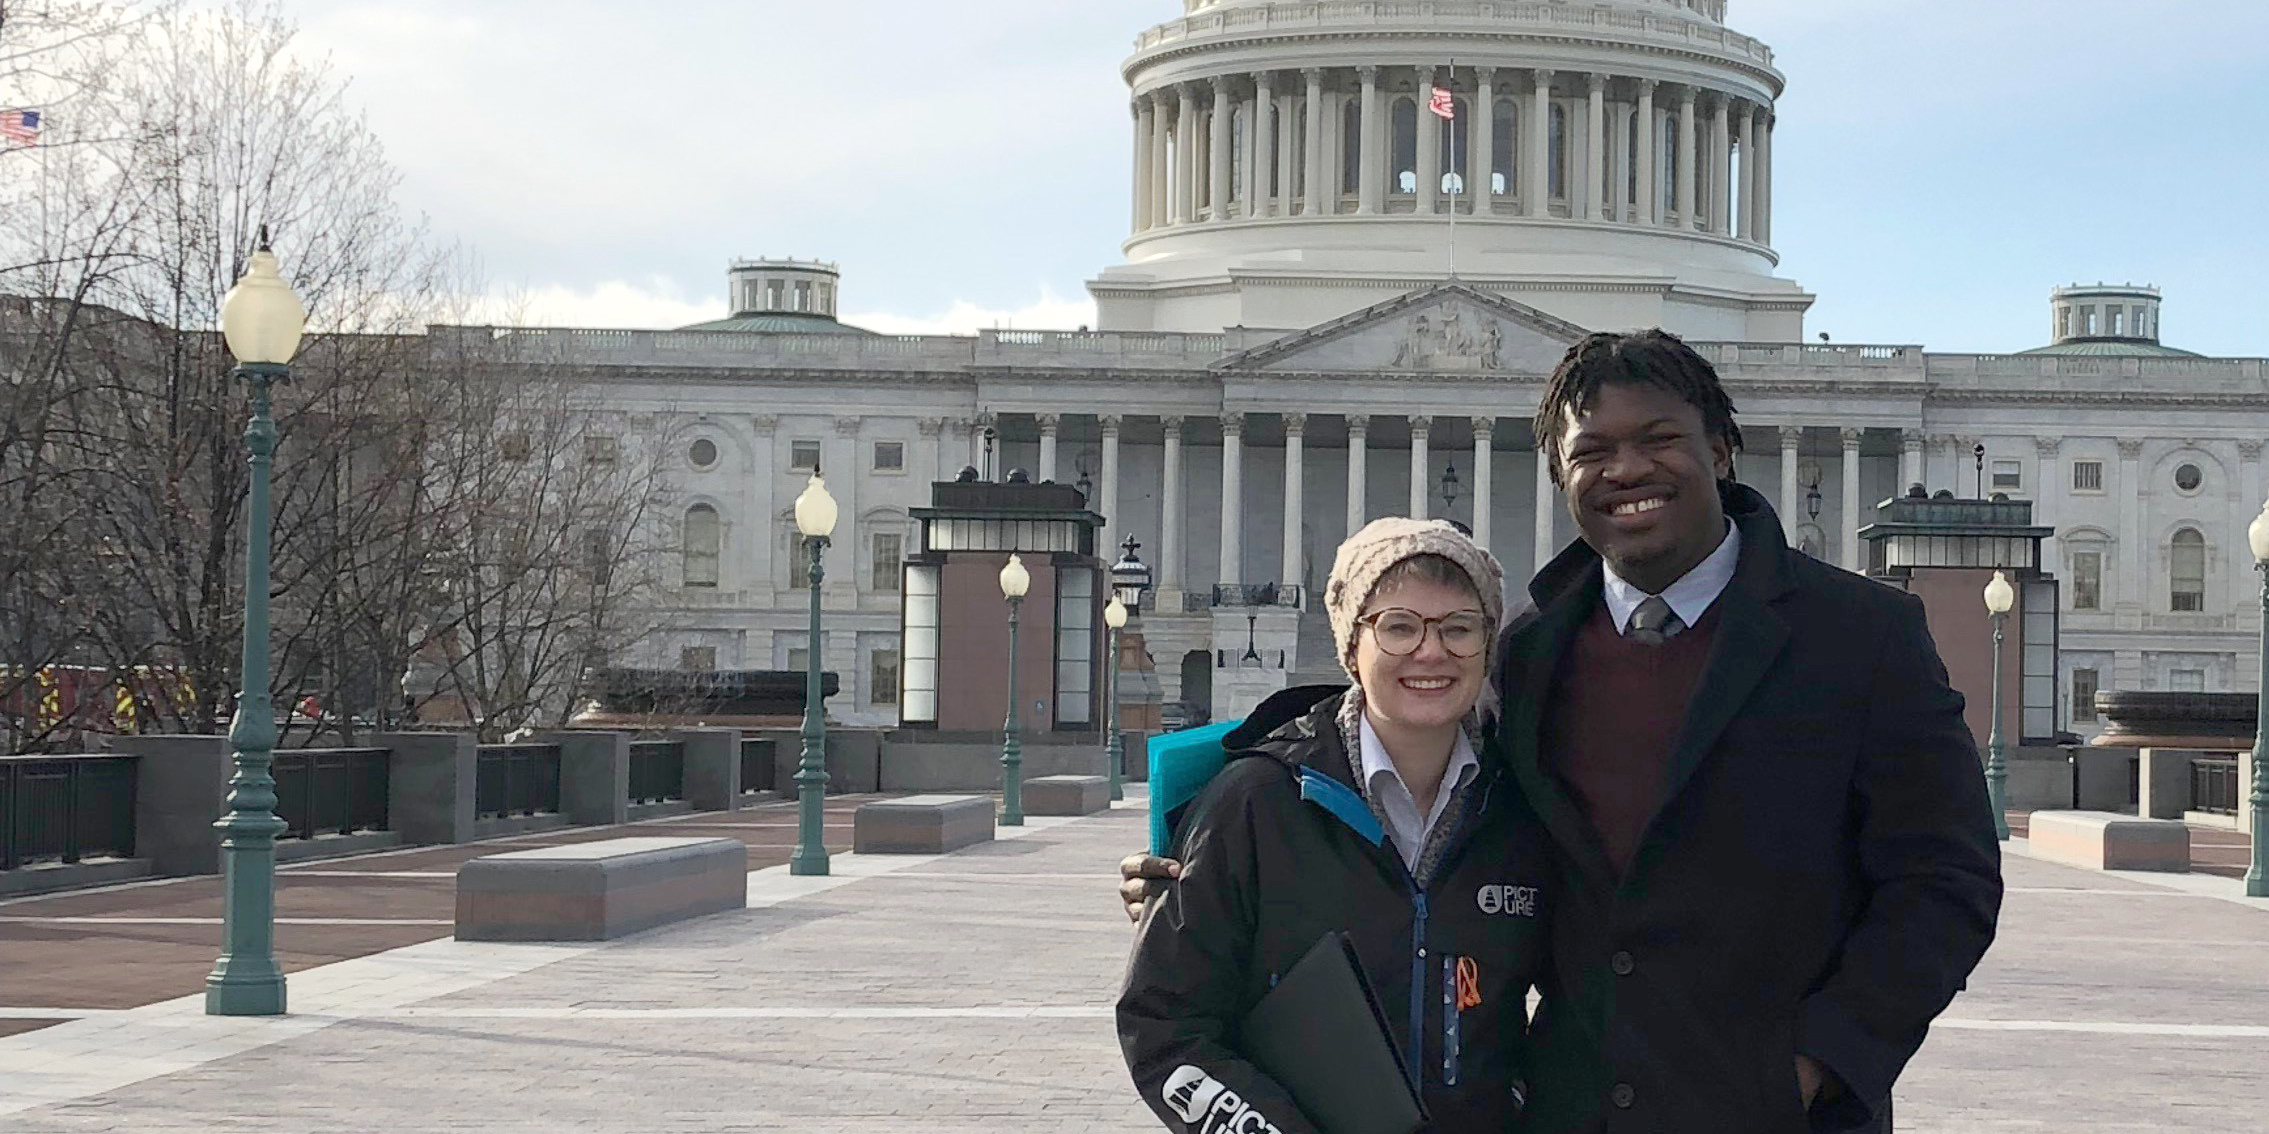 Students attend faith leadership conference in D.C.